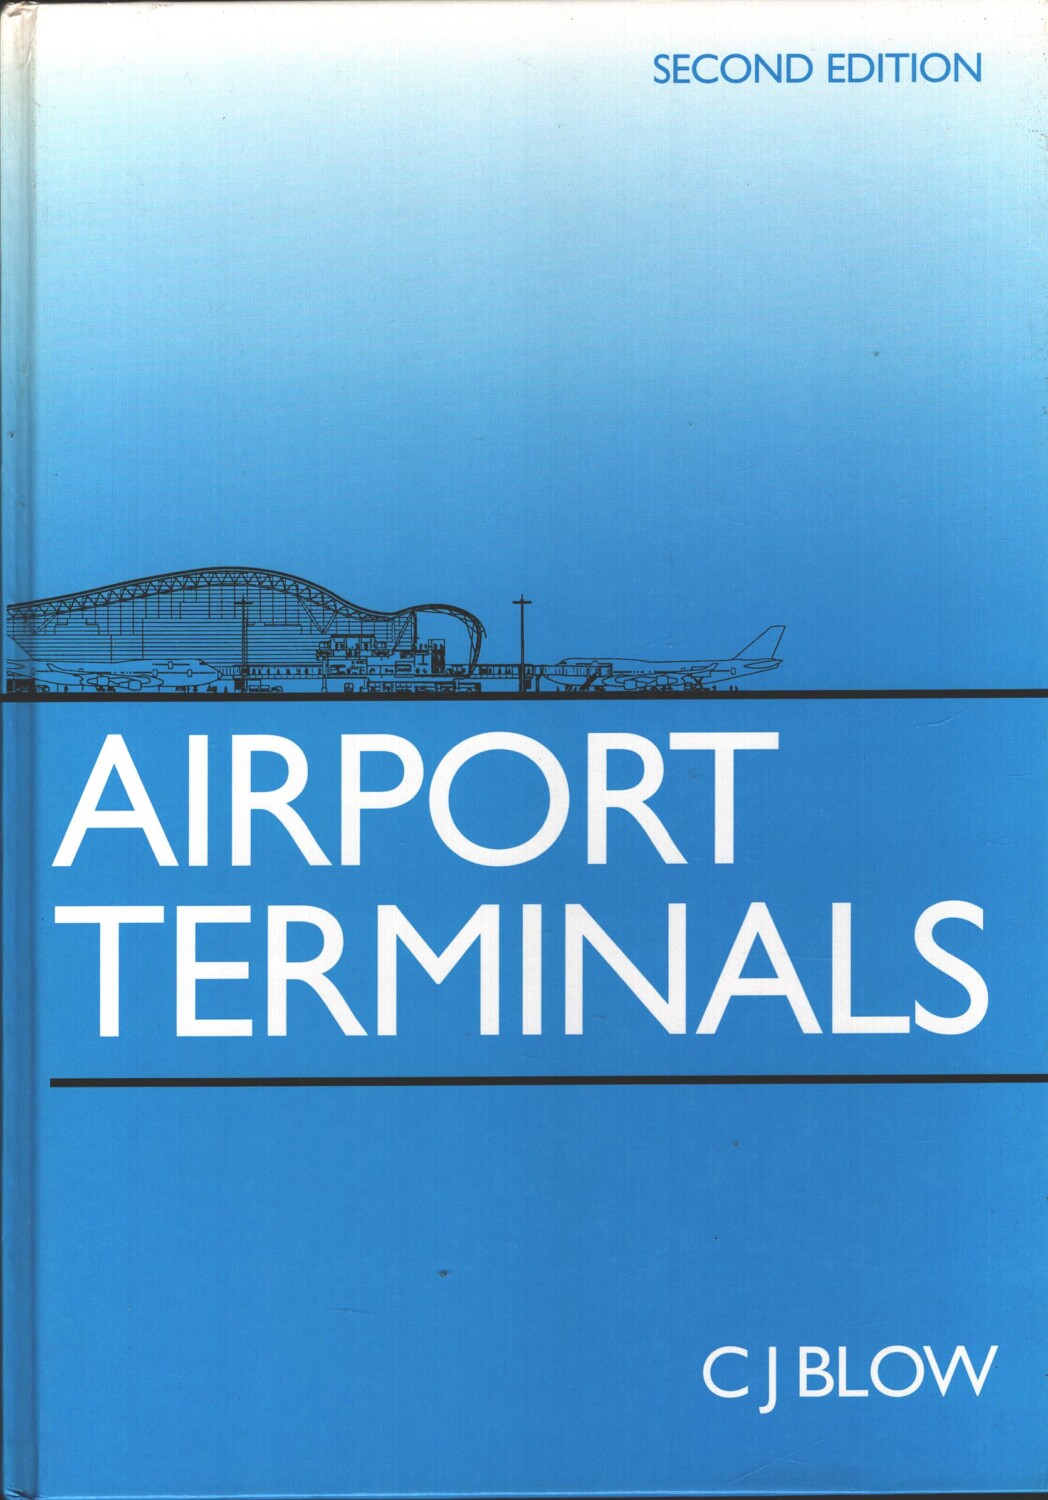 Airport Terminals di Blow, Christopher J. - Libro in Inglese ed. Butterworth ...